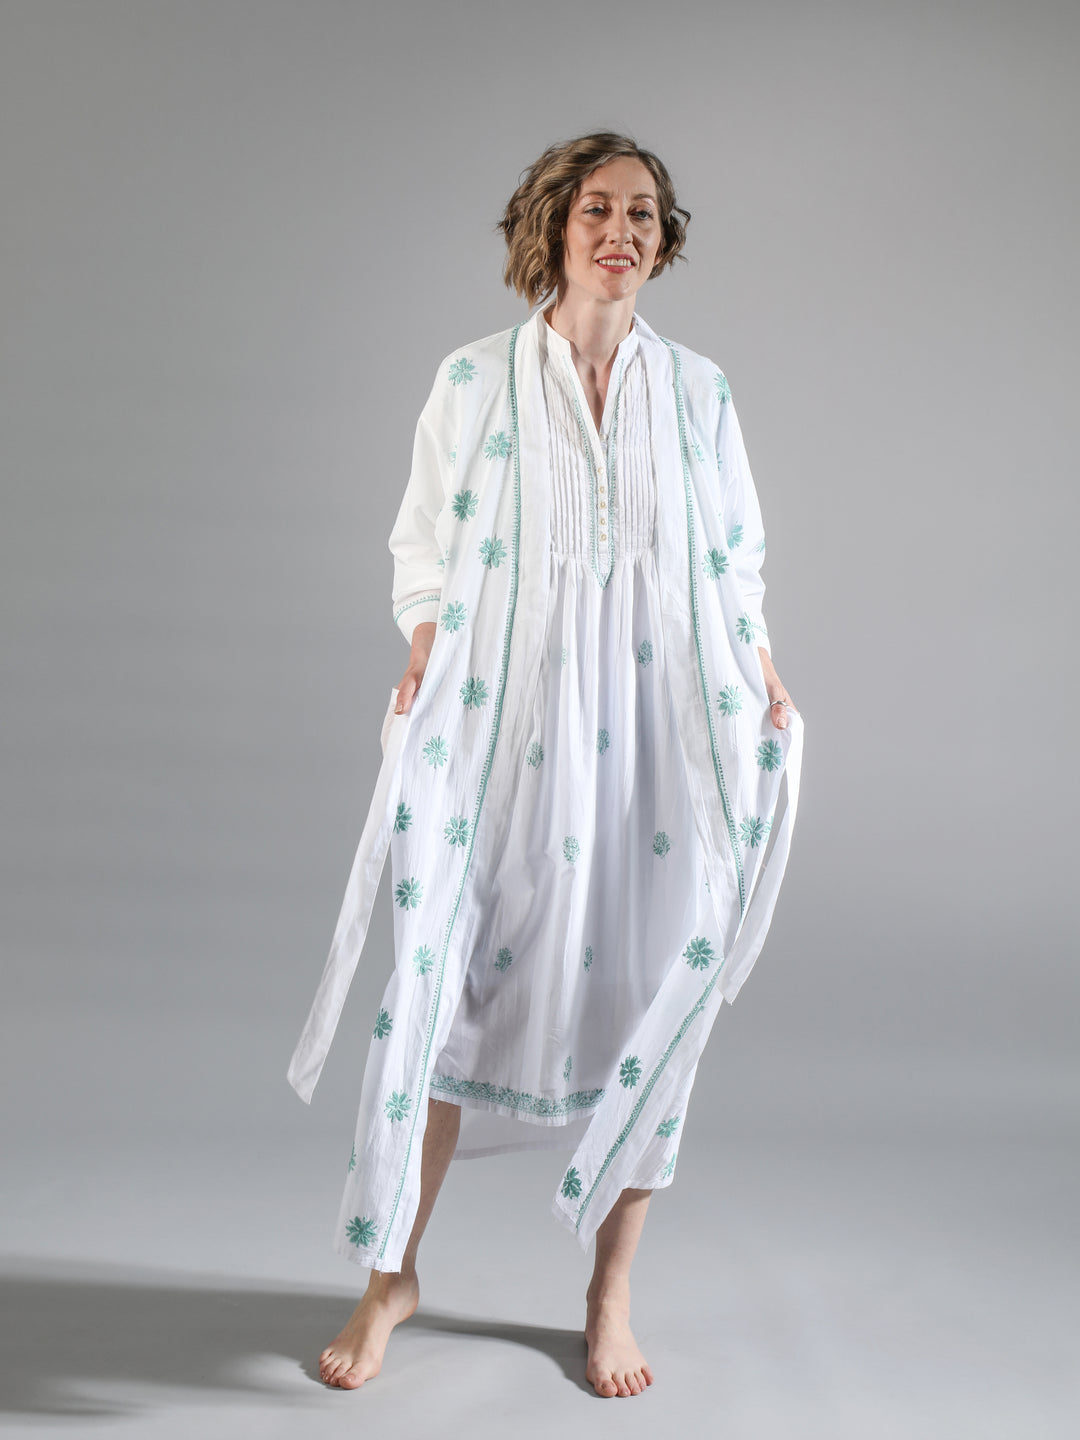 Cotton Robe / Chikan Embroidery | Tania Llewellyn Designs